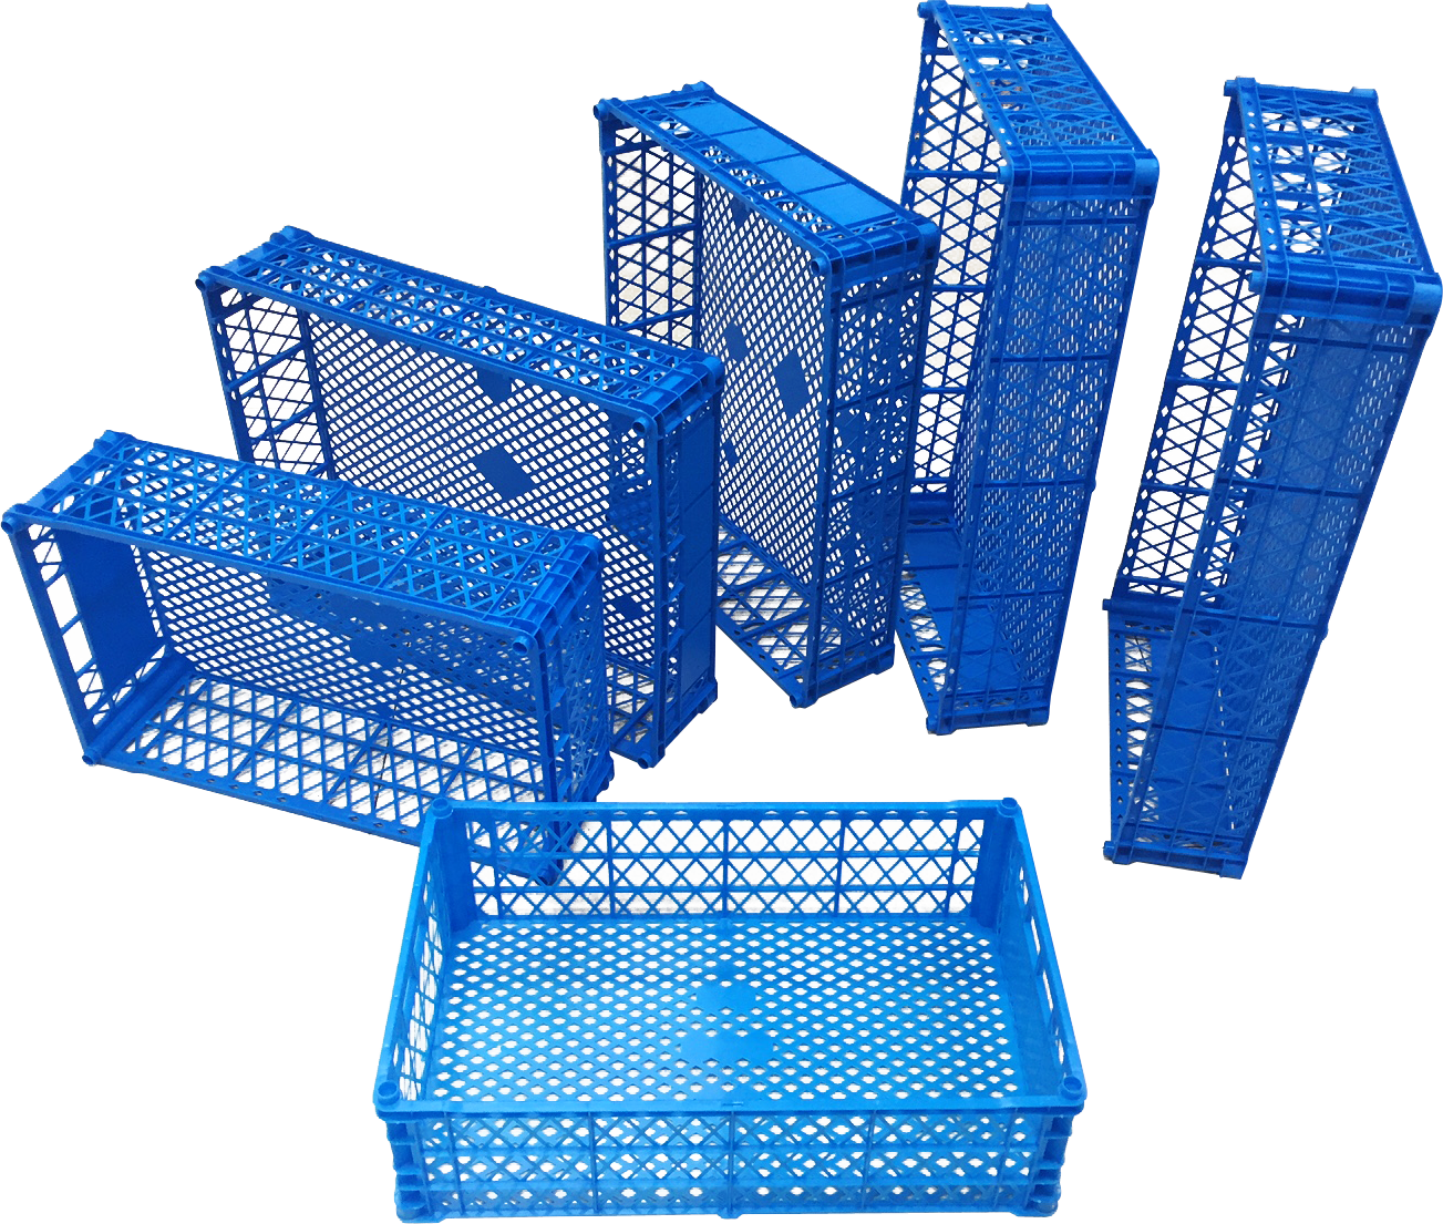  Crate Molding Production Line